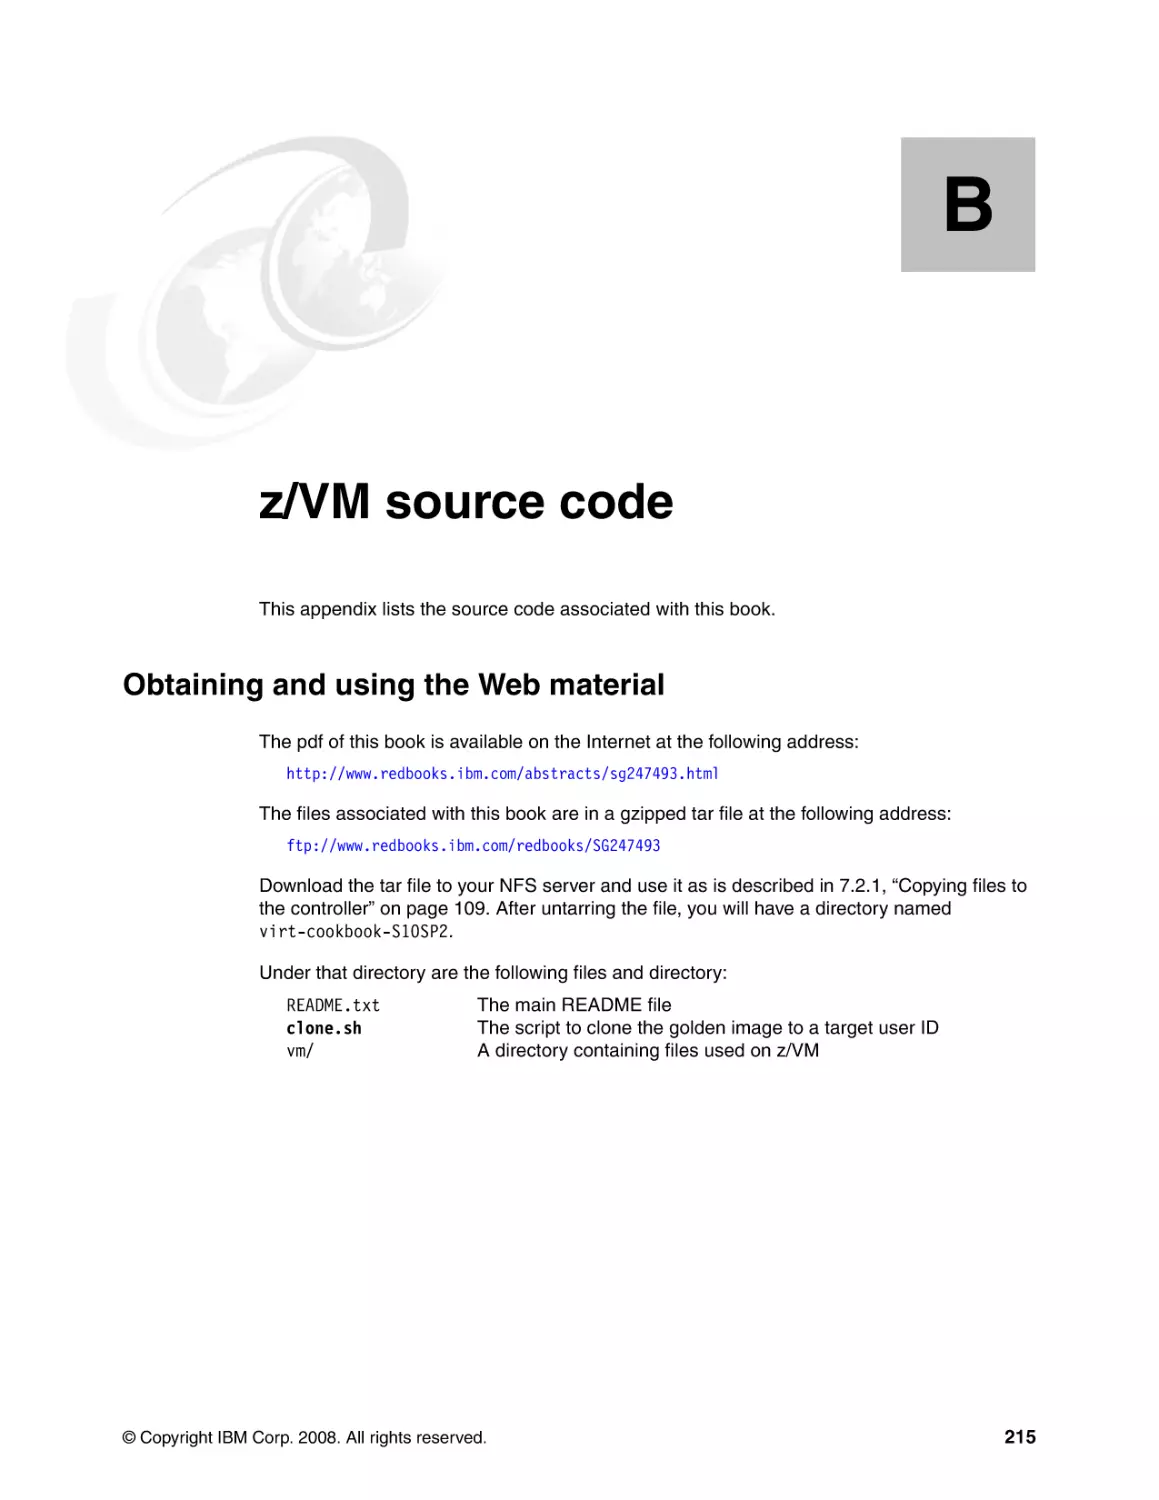 Appendix B. z/VM source code
Obtaining and using the Web material